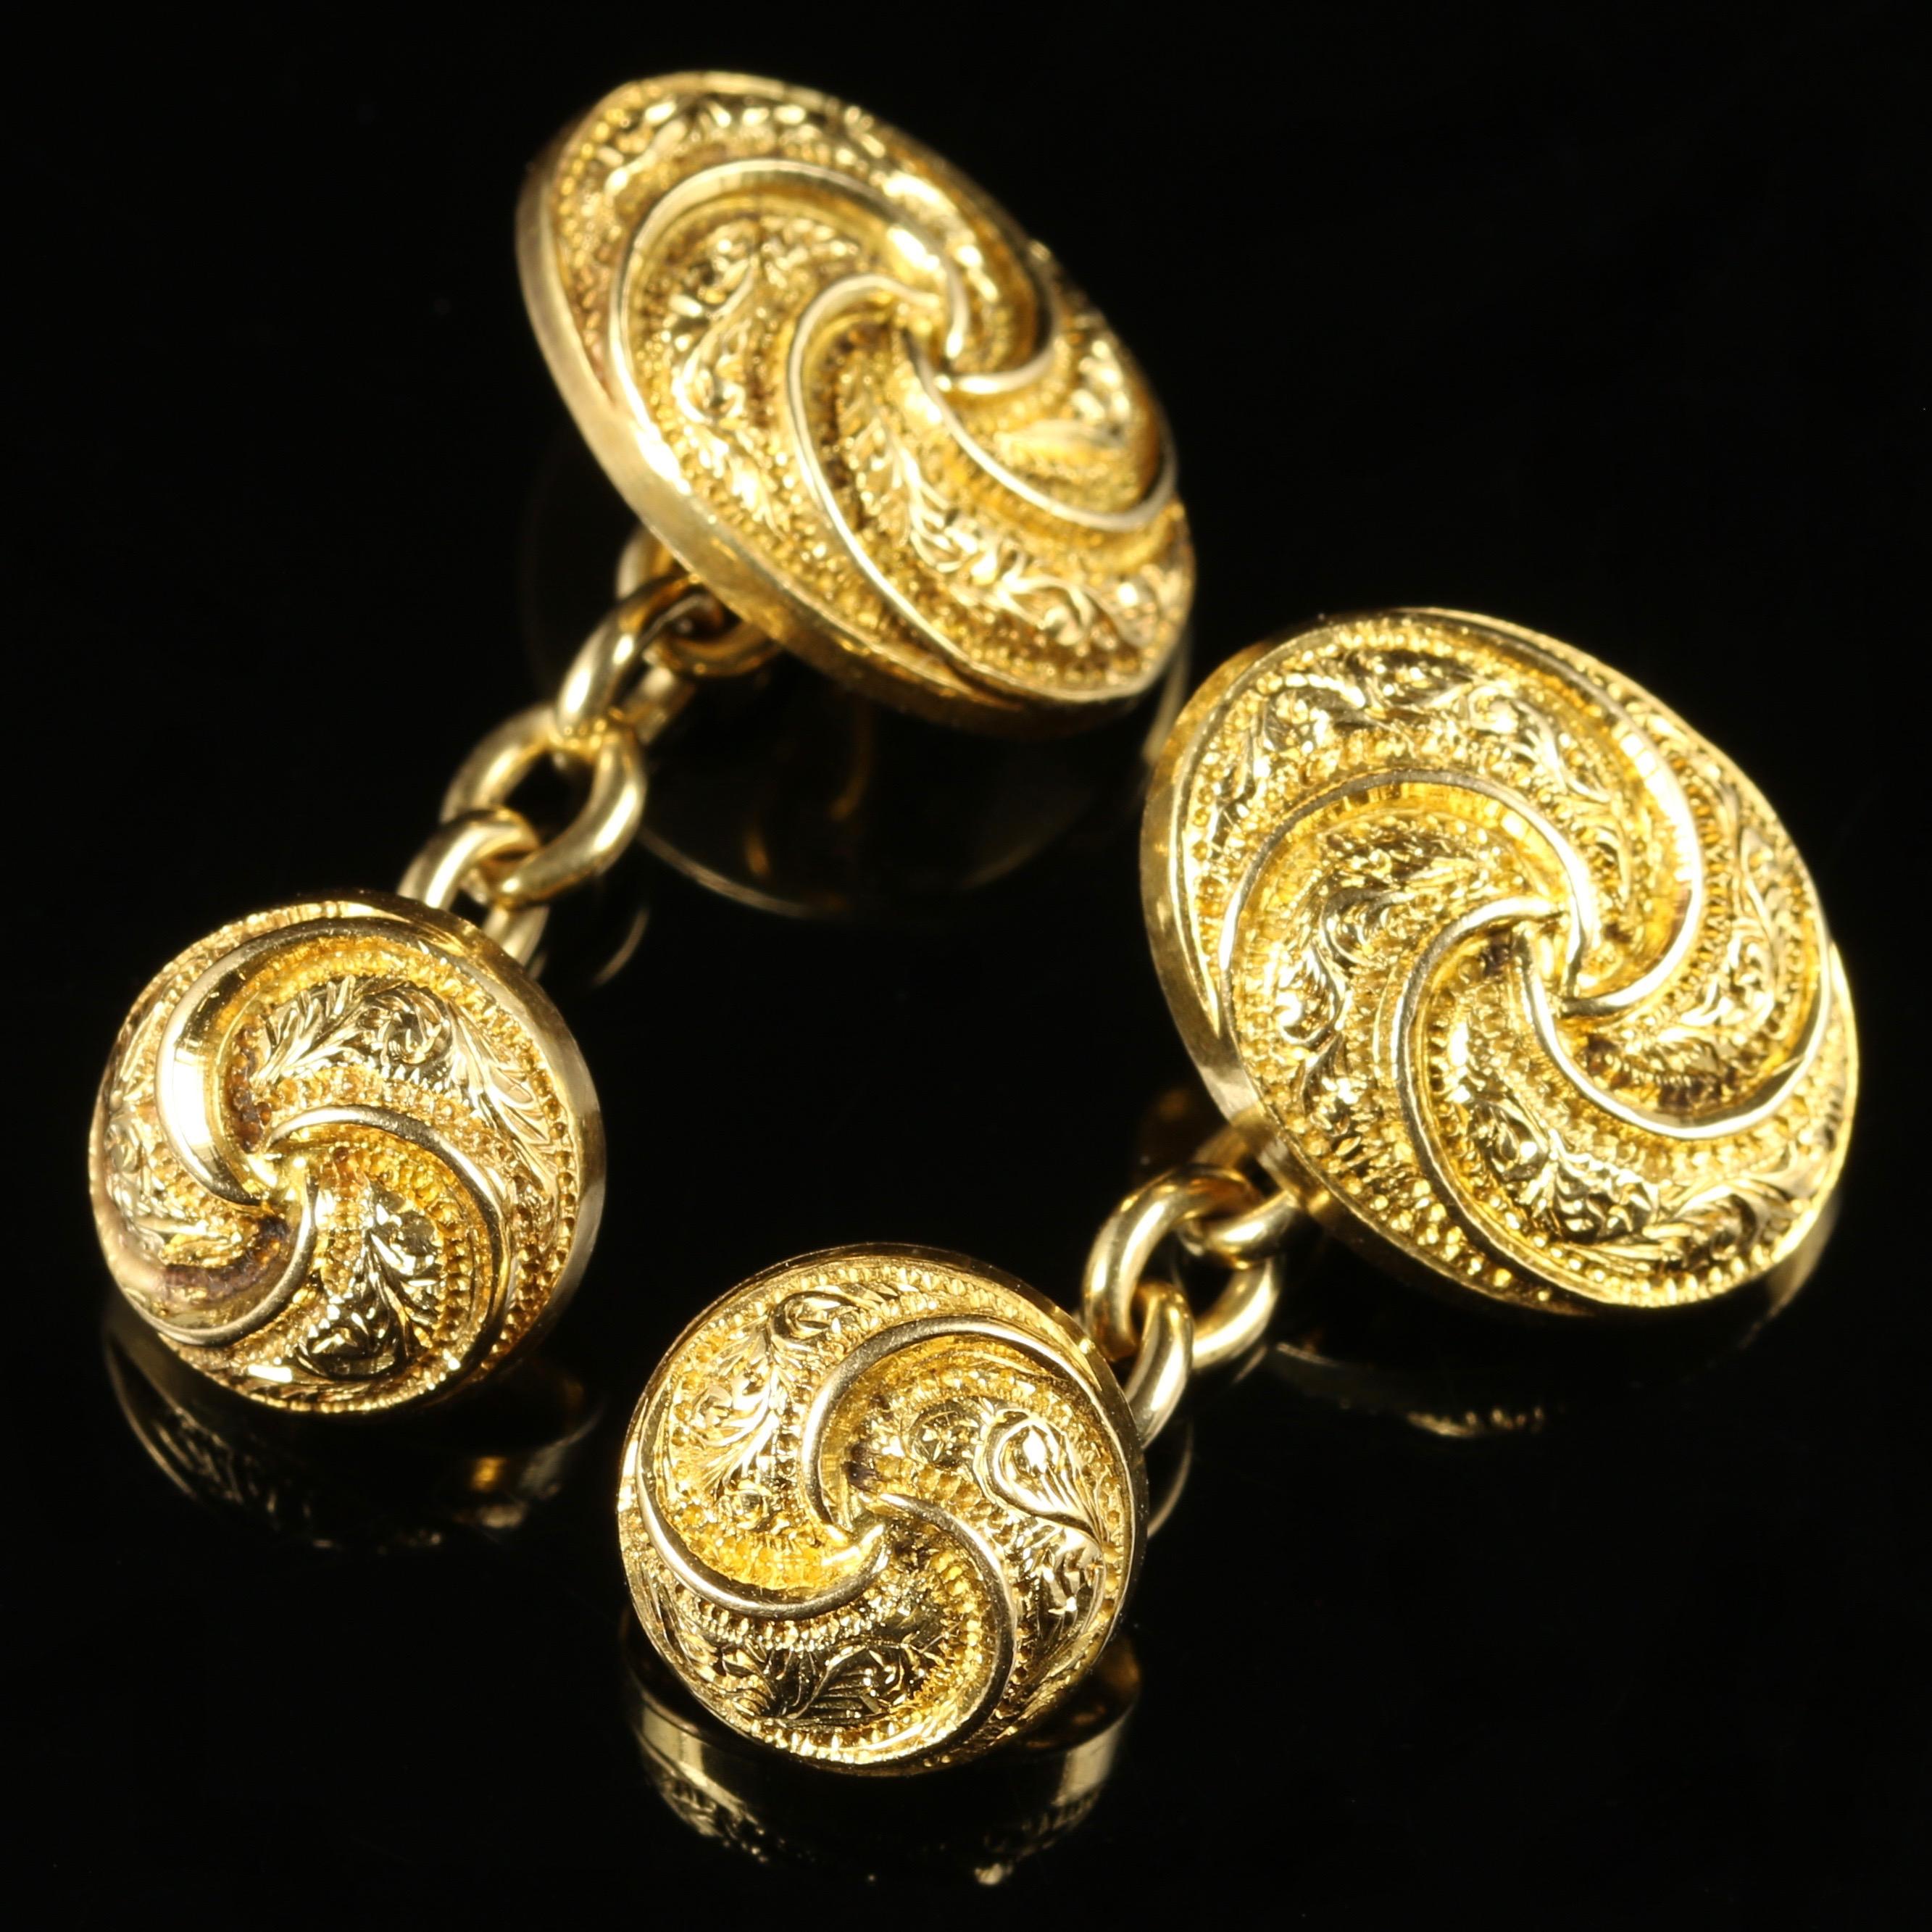 For more details please click continue reading down below...

These wonderful antique Victorian double cufflinks are set in 18ct solid Gold. Circa 1900

Adorned with fabulous detailing all round and hallmarked 18ct on the reverse.

These cufflinks